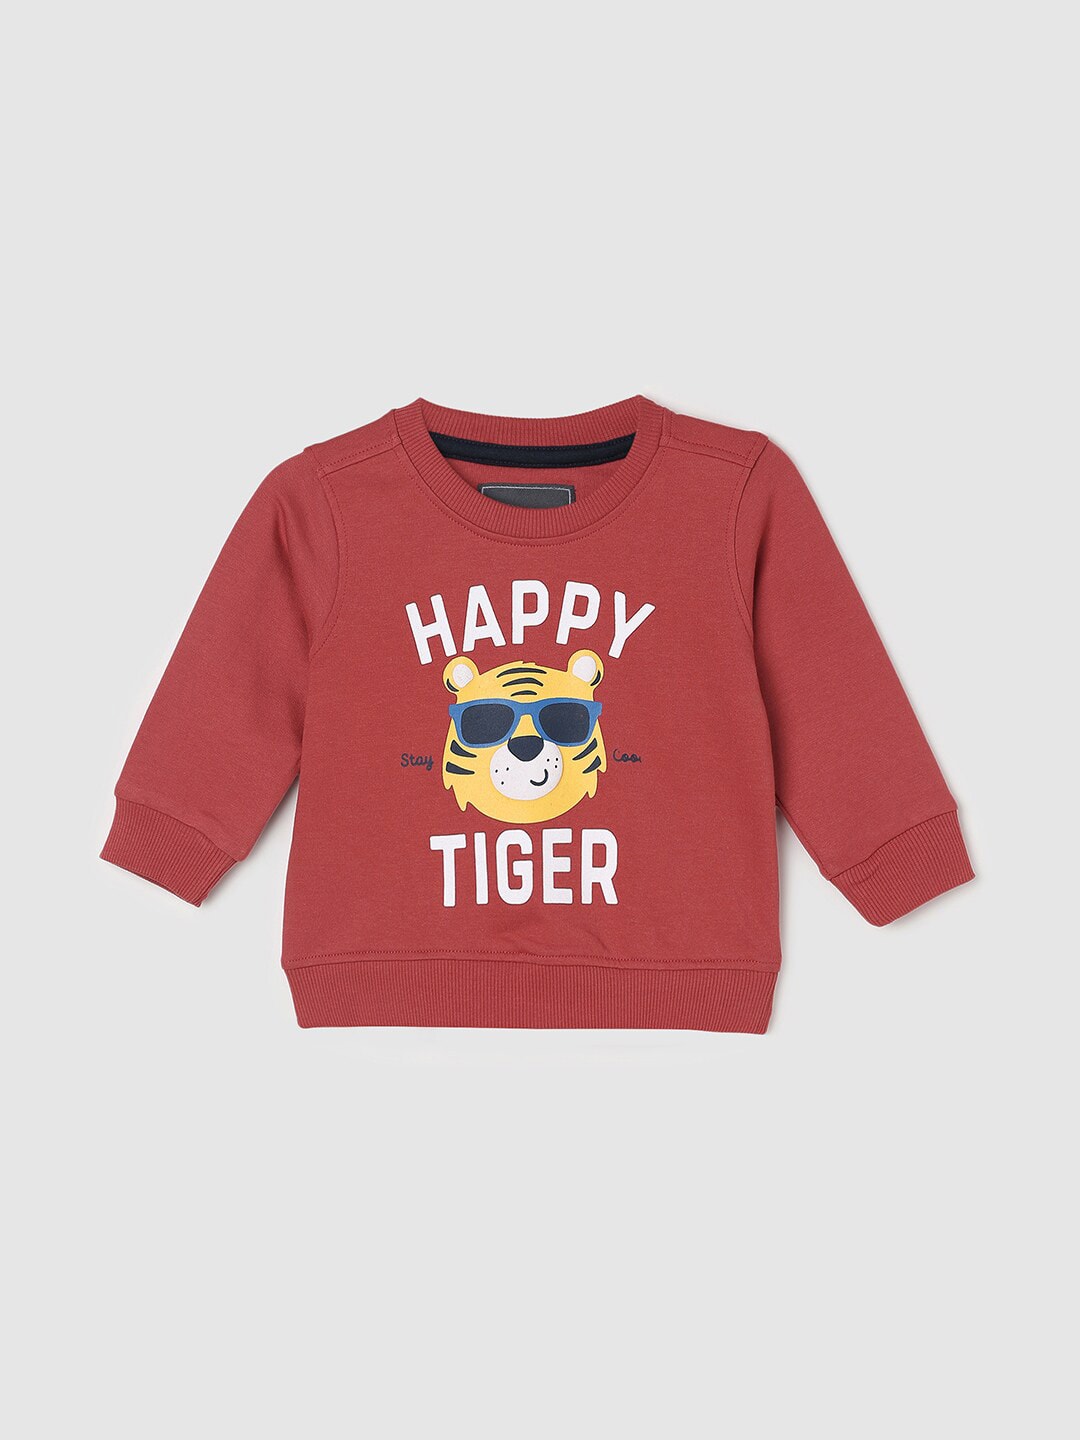 max Infant Boys Typography Printed Cotton Pullover Sweatshirt